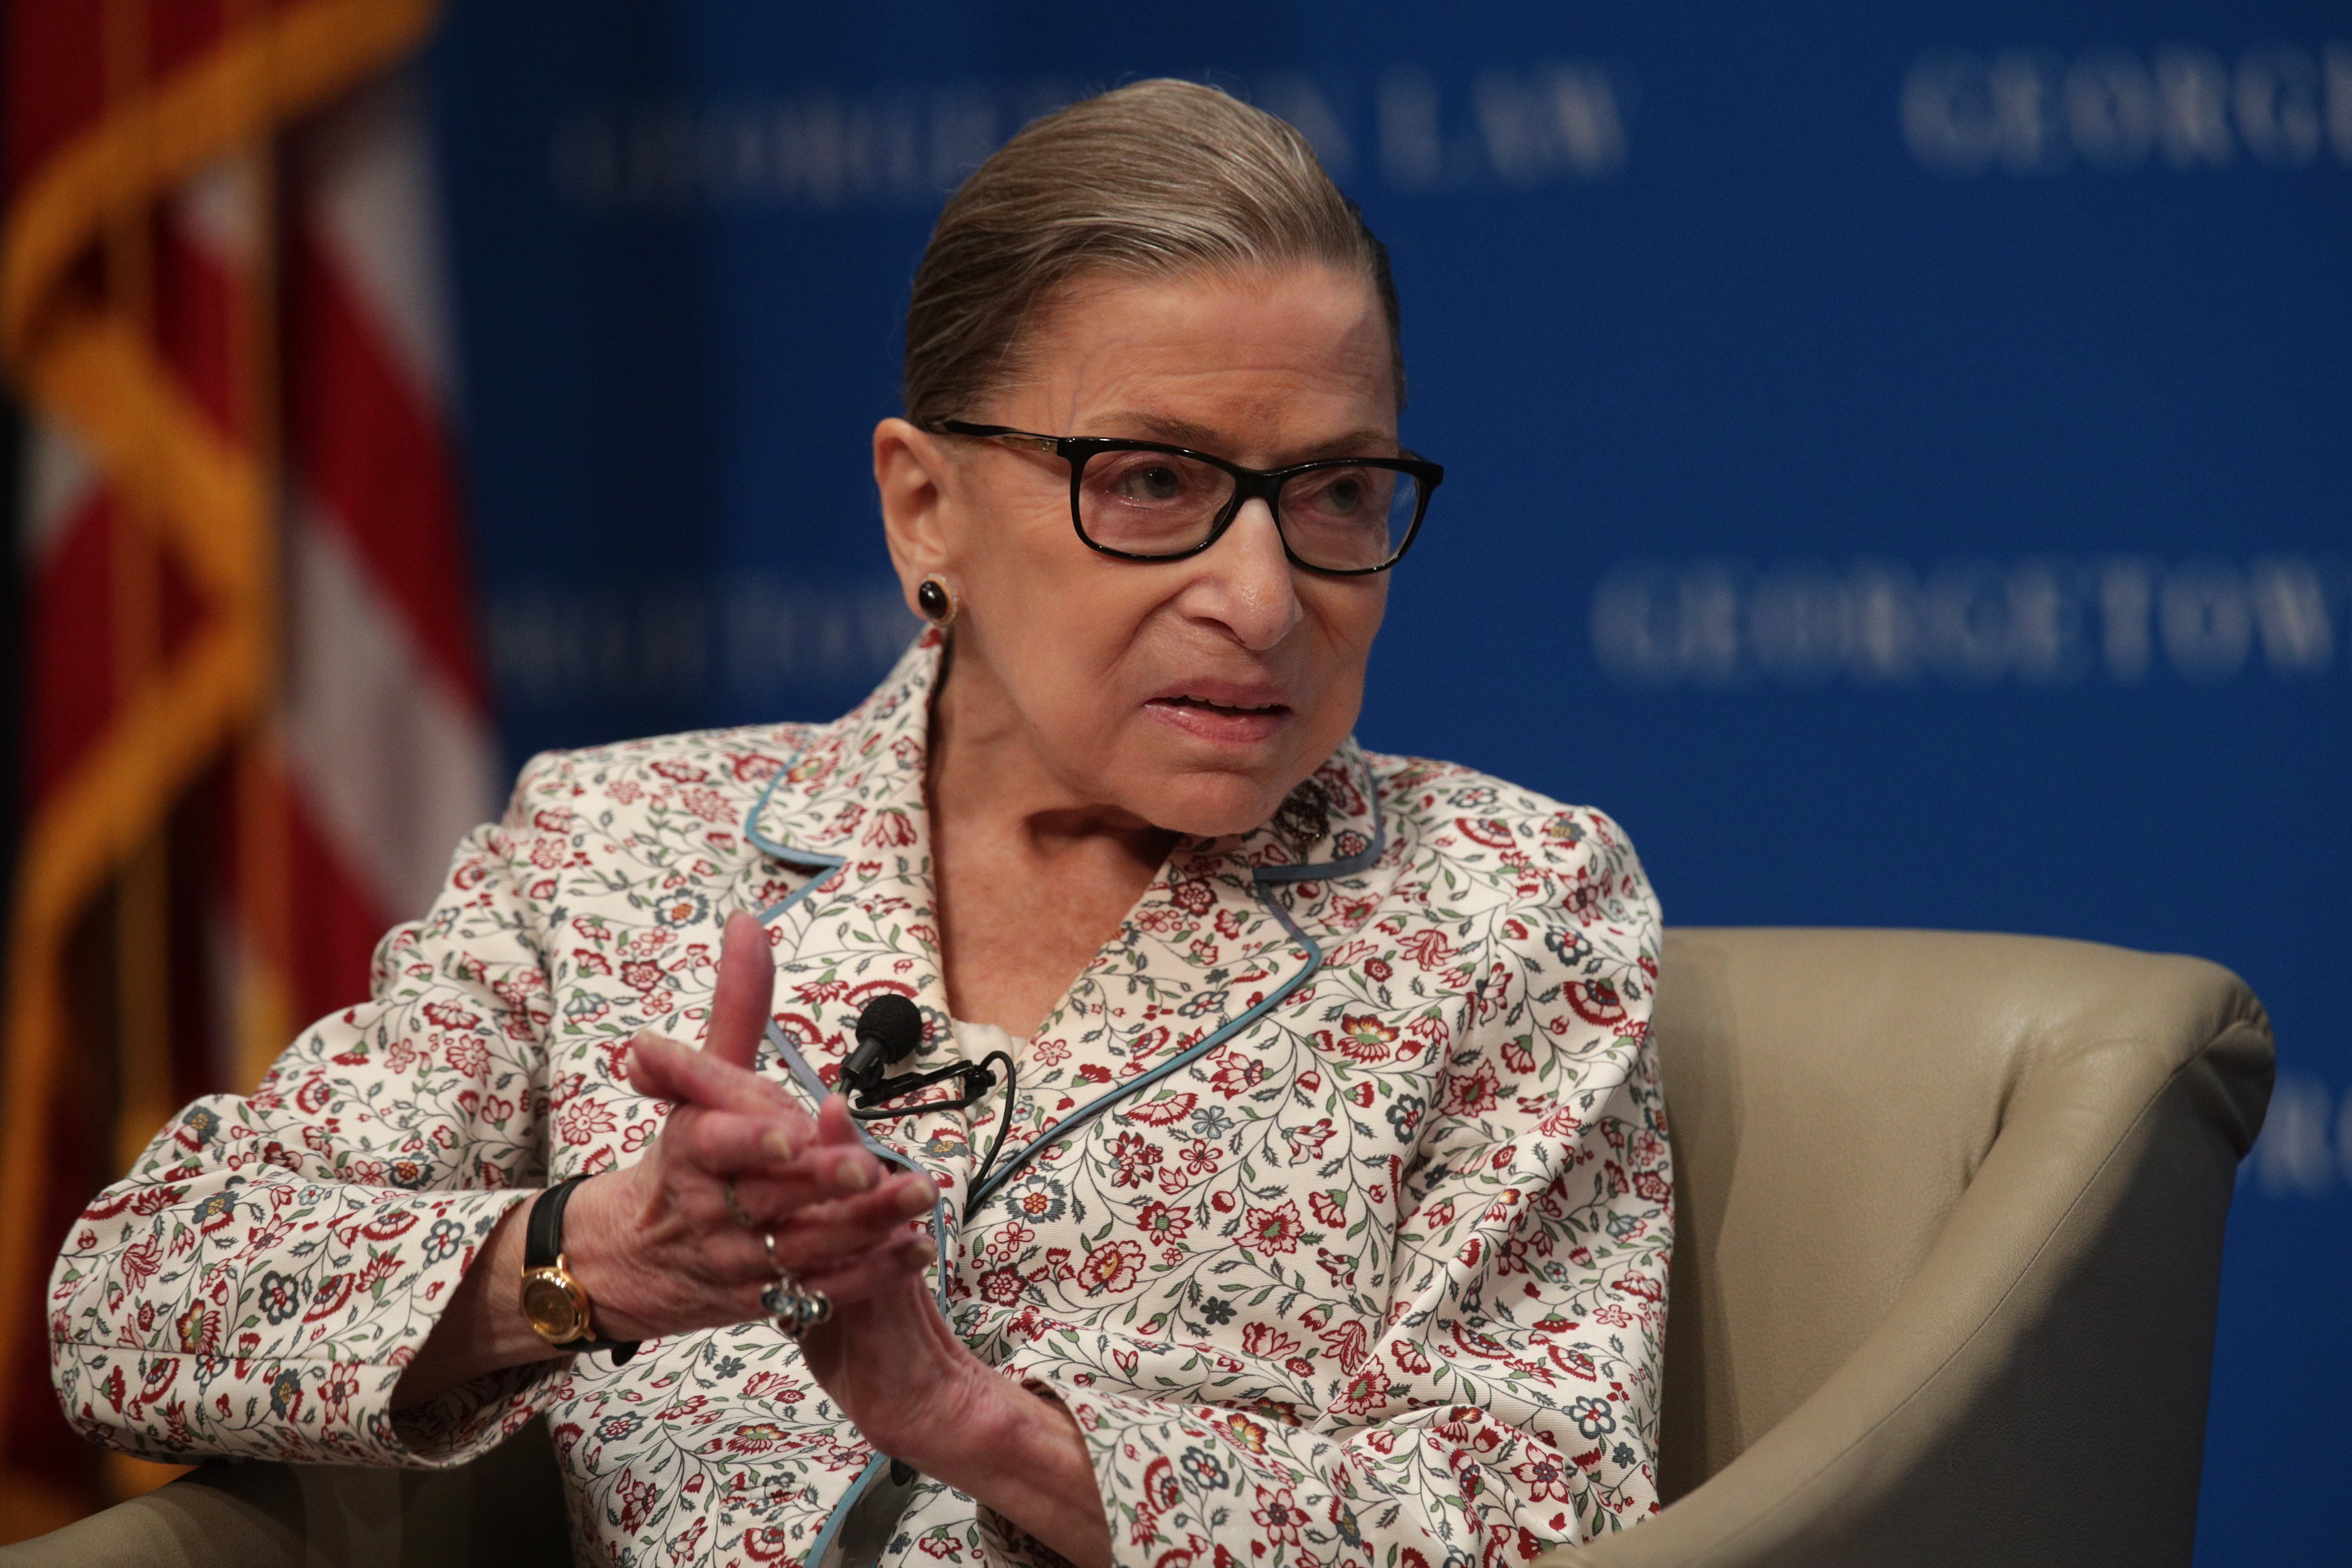 ustice Ruth Bader Ginsburg participates in a discussion at Georgetown University Law Center July 2, 2019, in Washington, DC. | Source: Getty Images.